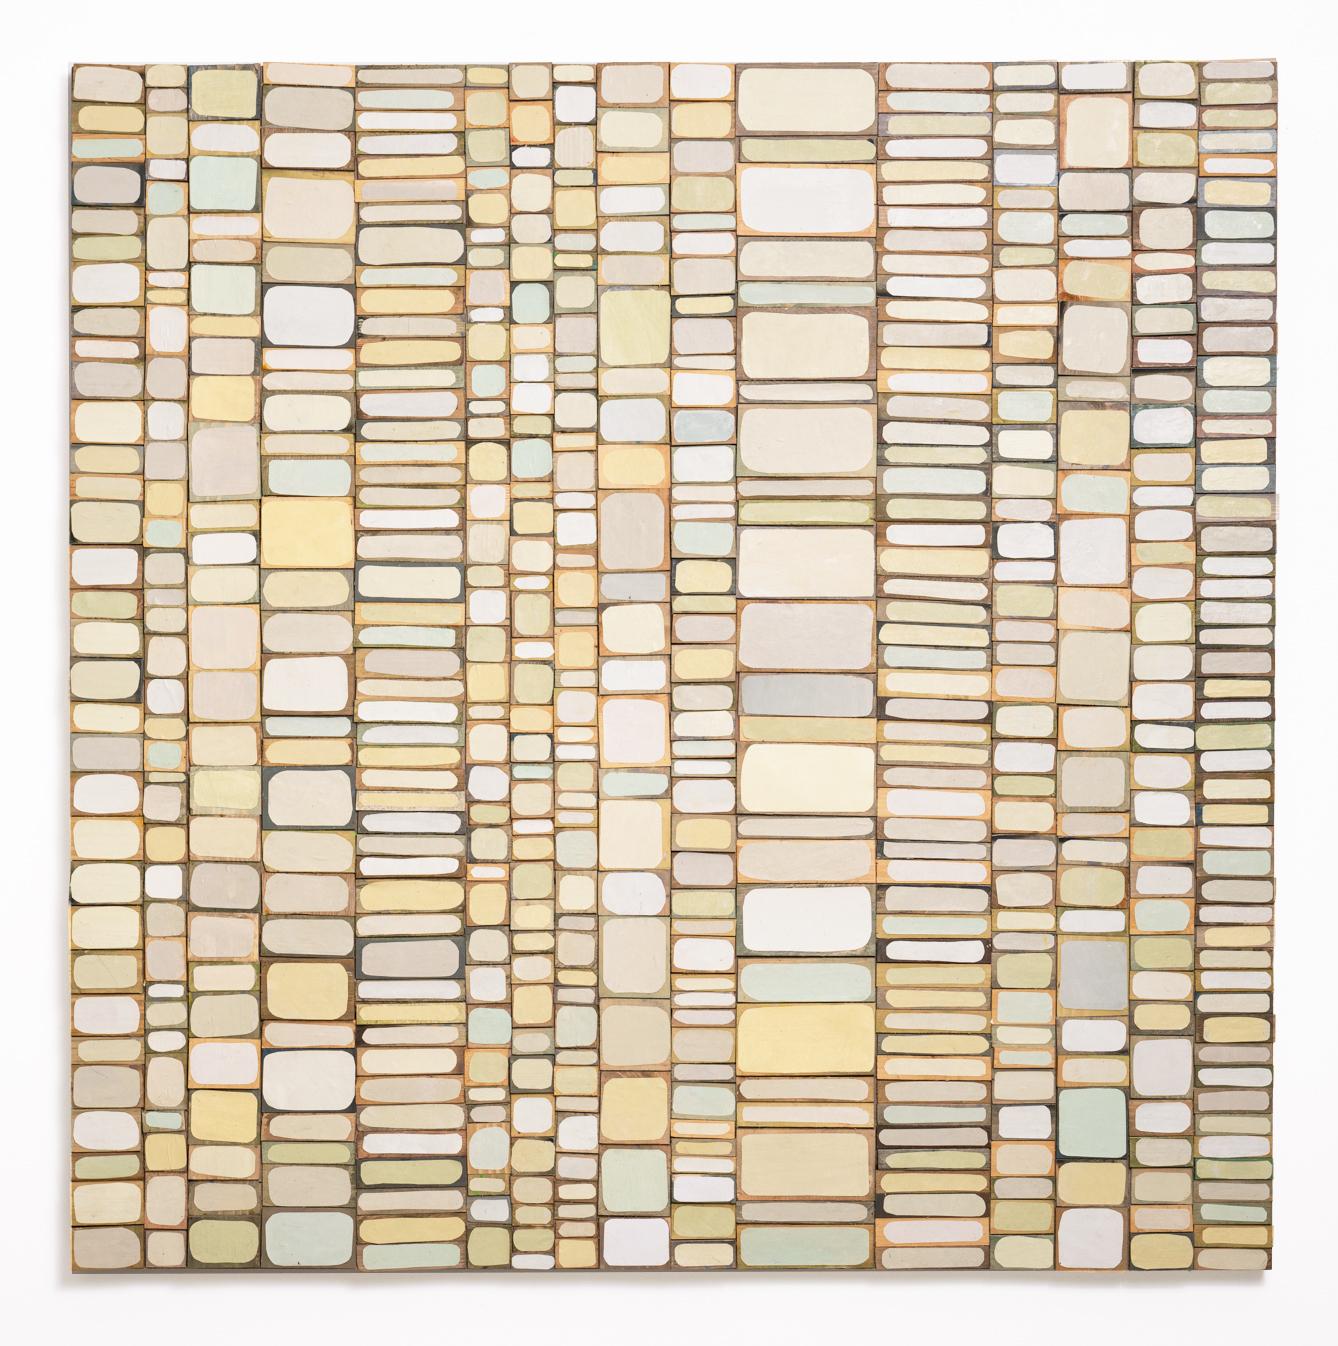 Stephen Walling Abstract Sculpture - Allyssian: Neutral Abstract Wood Wall Sculpture Soft White, Pastel Green, Tan 